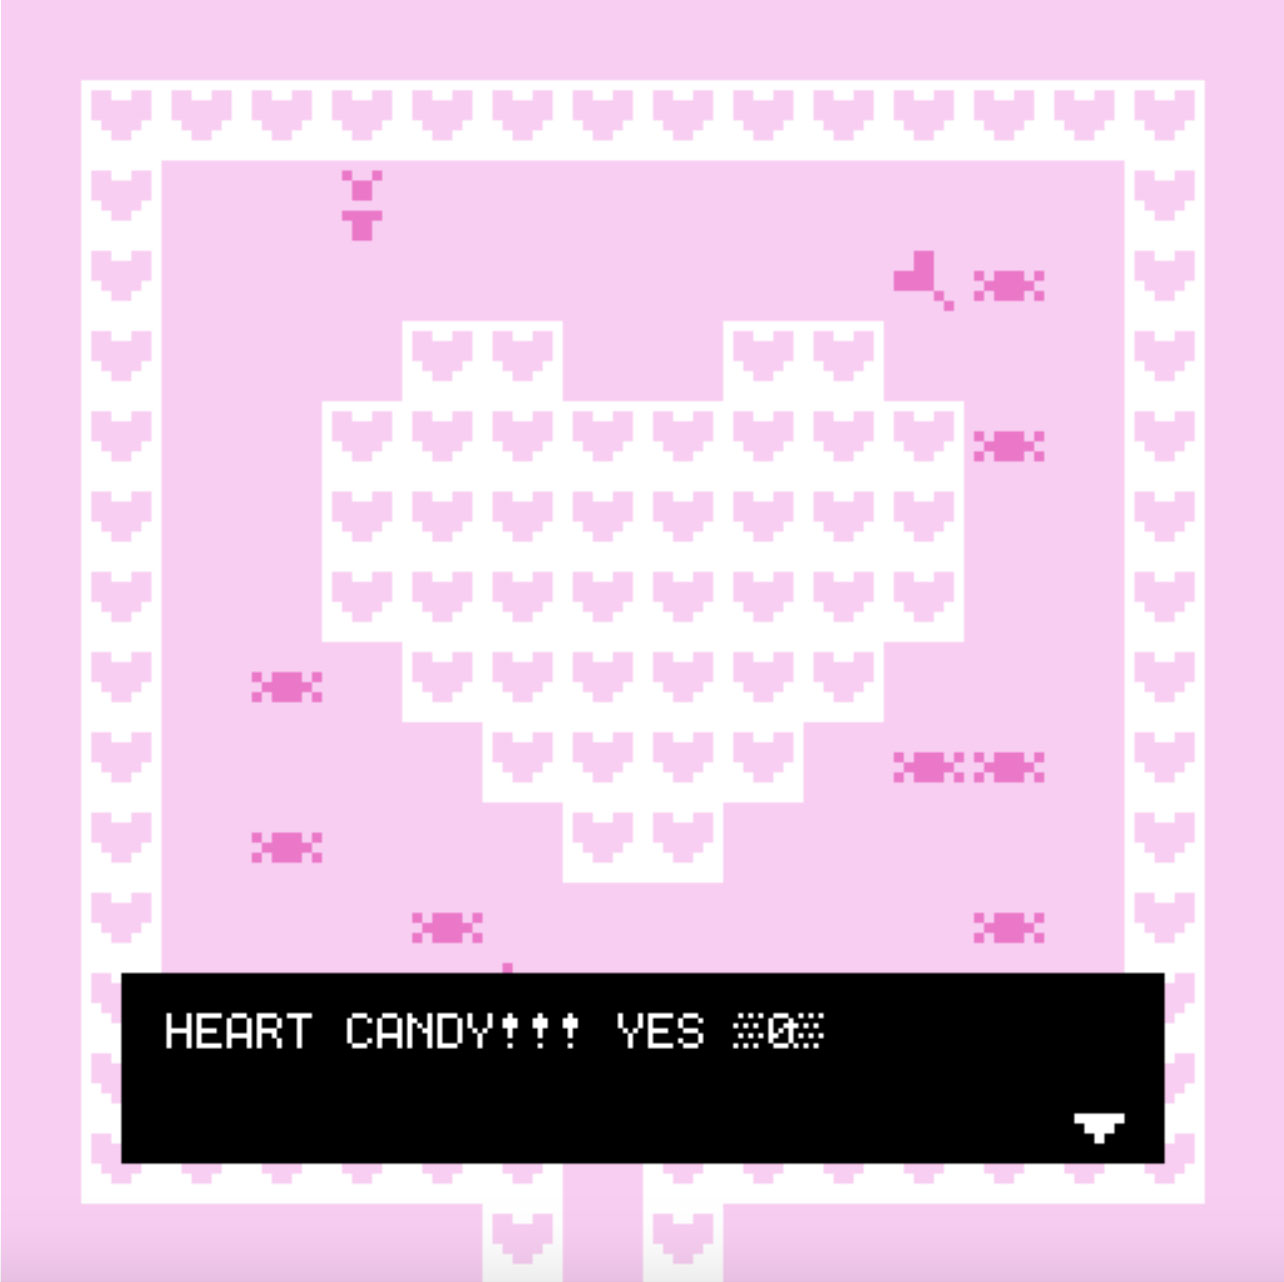 A digital art work with a pink background, a large white and pink heart placed in the middle with a border of pink and white hearts. Text displayed in a black text box